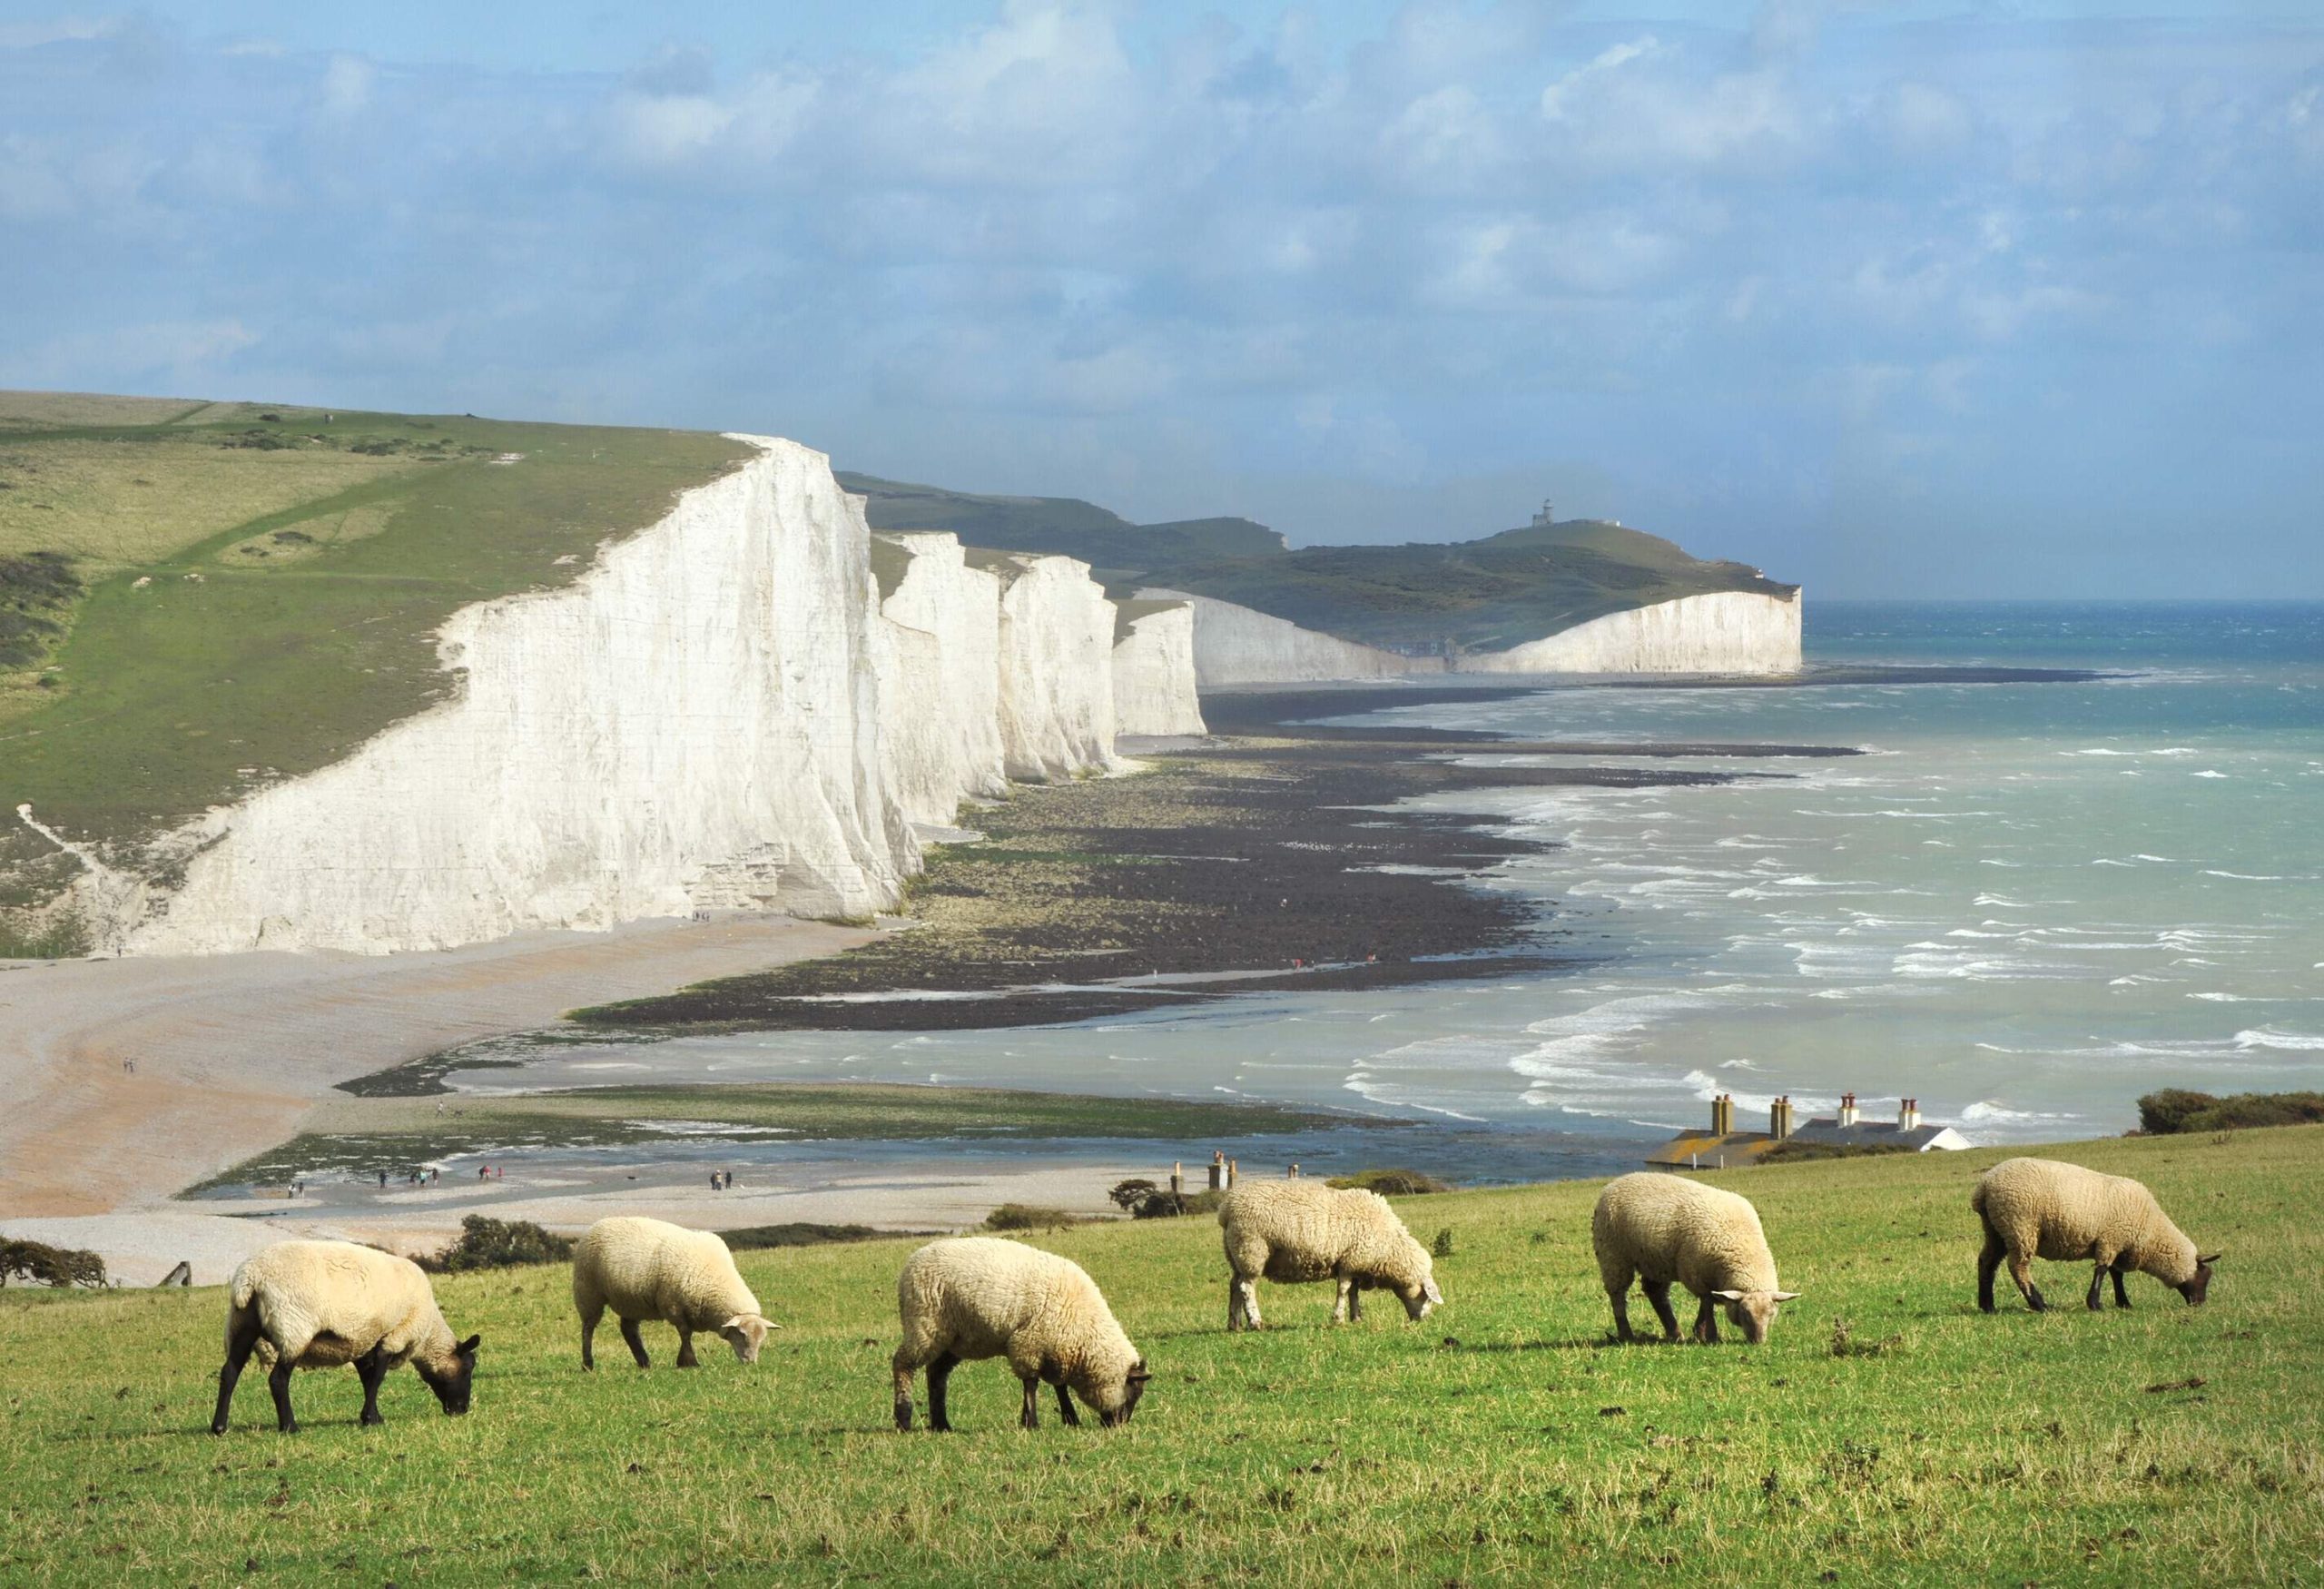 dest_england_uk_seven_sisters_gettyimages-184380871_universal_within-usage-period_93457